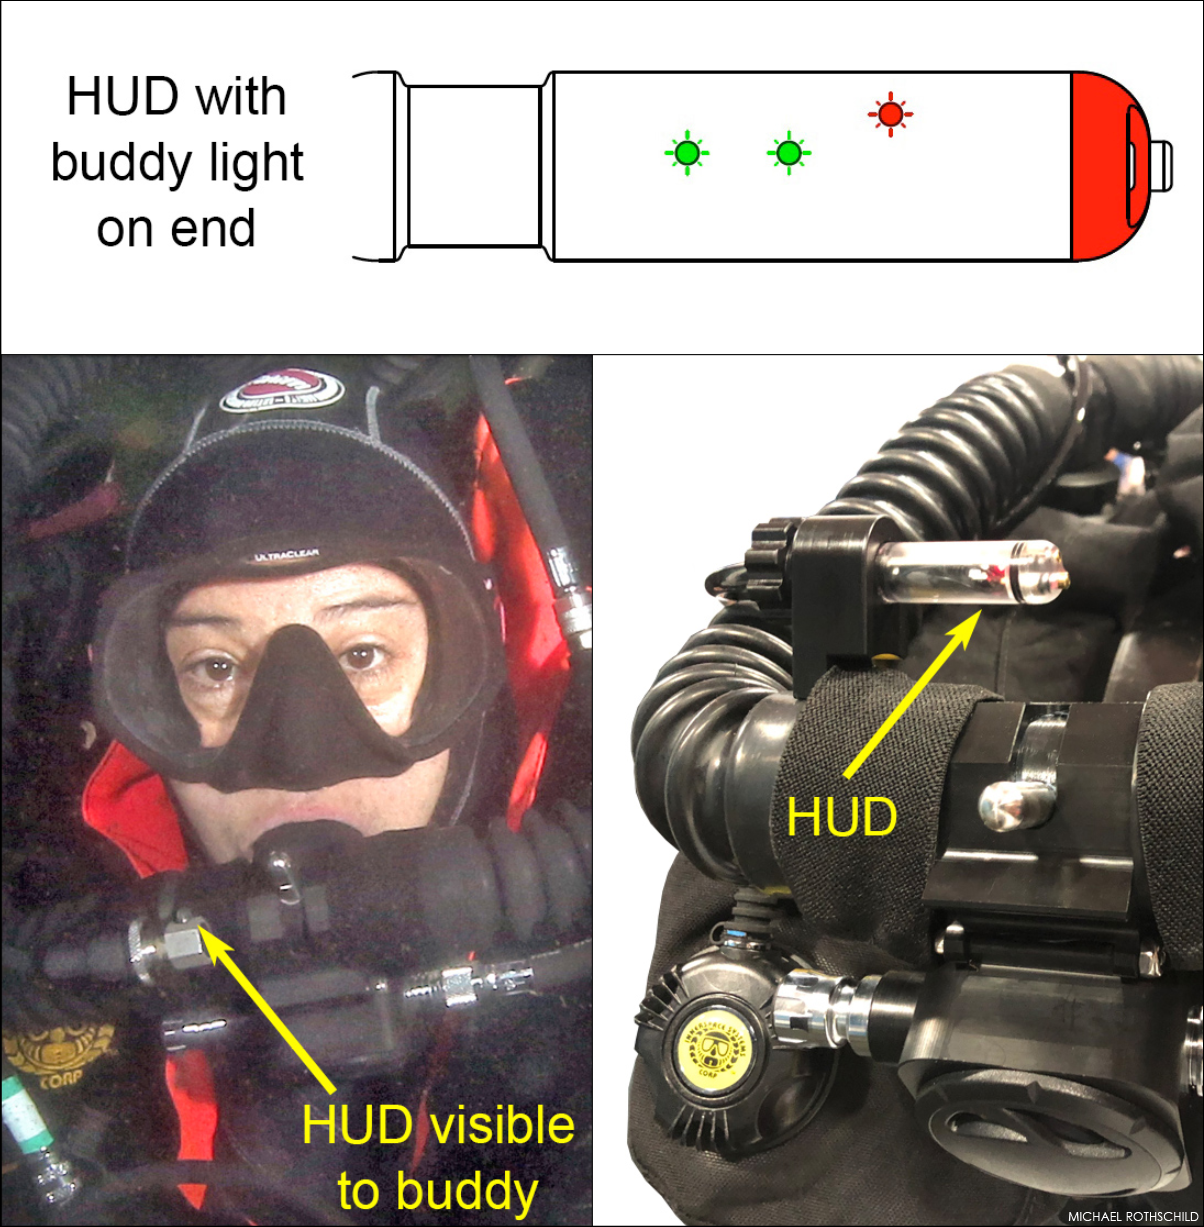 Figure 5: Heads-up display (HUD) with buddy light (by Michael Rothschild)